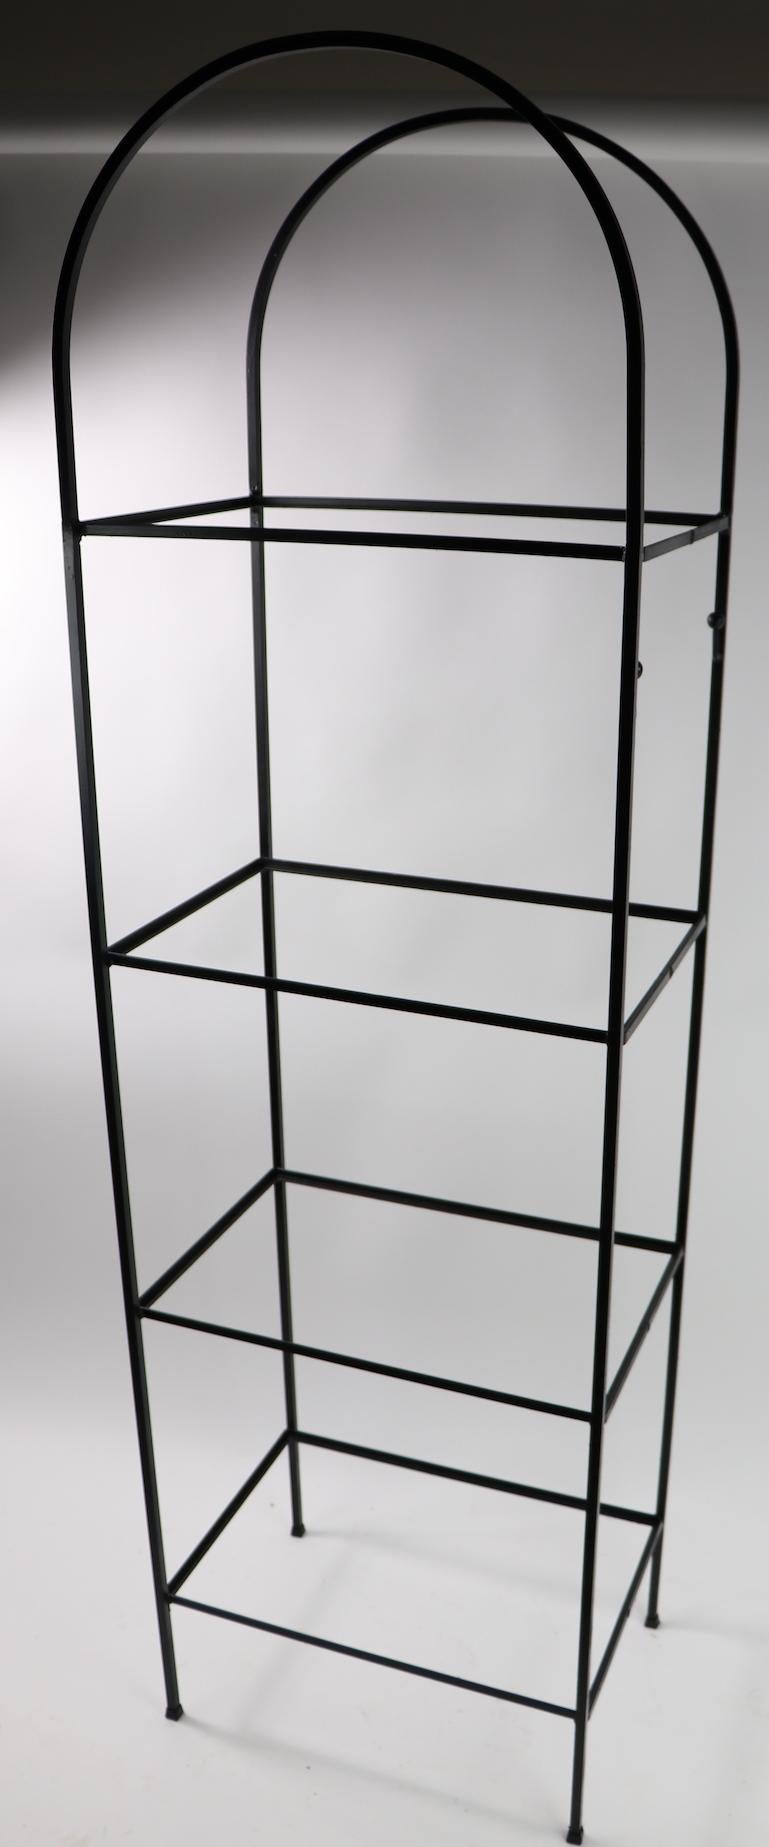 Arch top wrought iron shelf with plate glass shelves, attributed to Arthur Umanoff. Freestanding unit with four shelves, each 17 in apart. Great for display, storage etc. clean, ready to use.